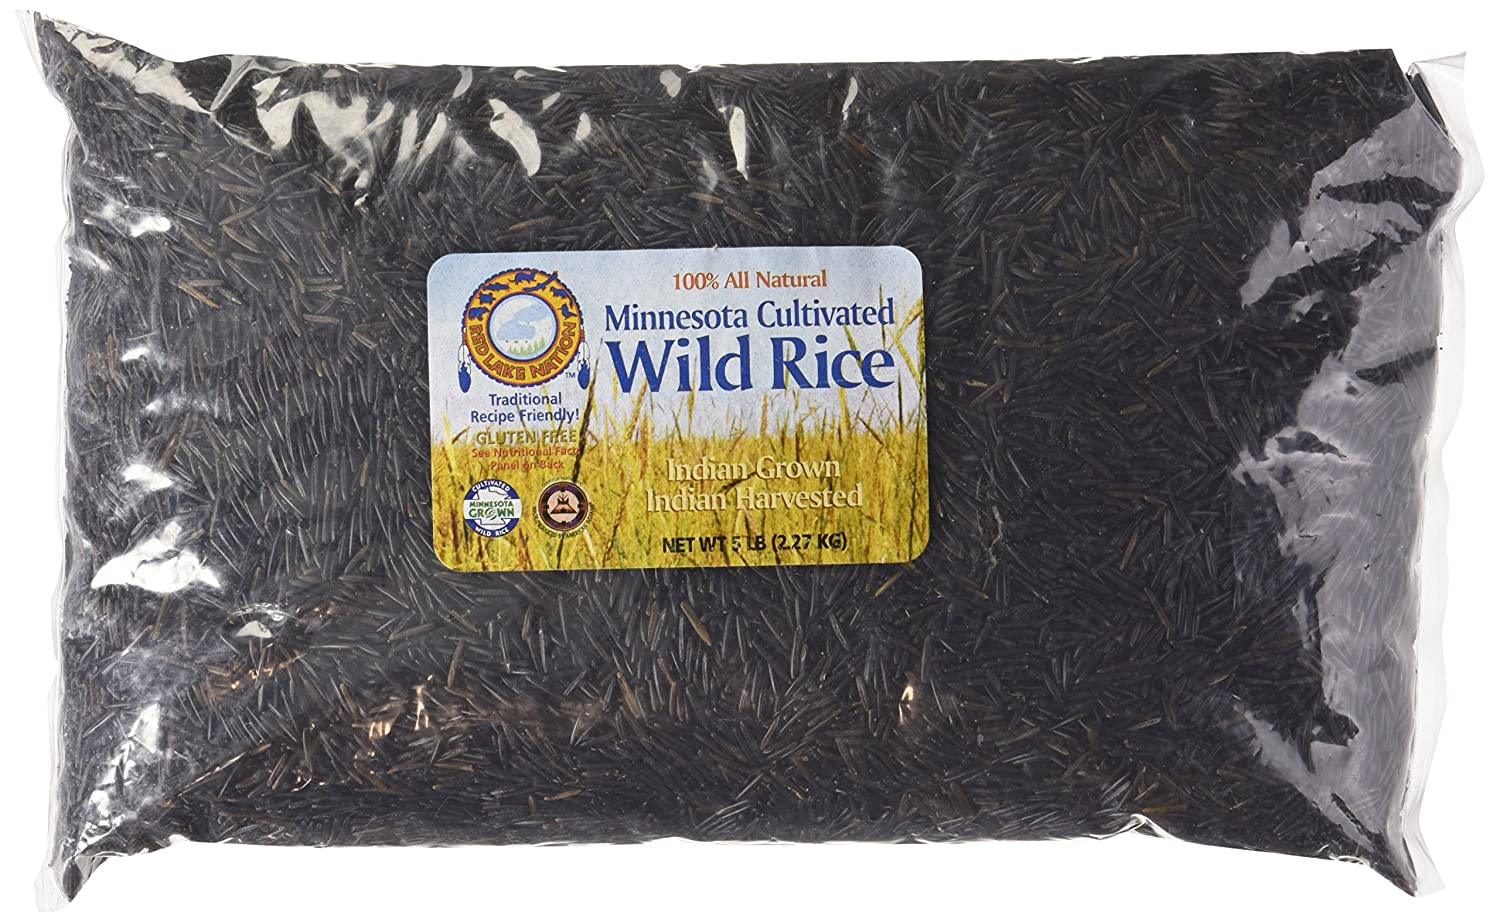 Red Lake Nation 100% All Natural Minnesota Cultivated Wild Rice